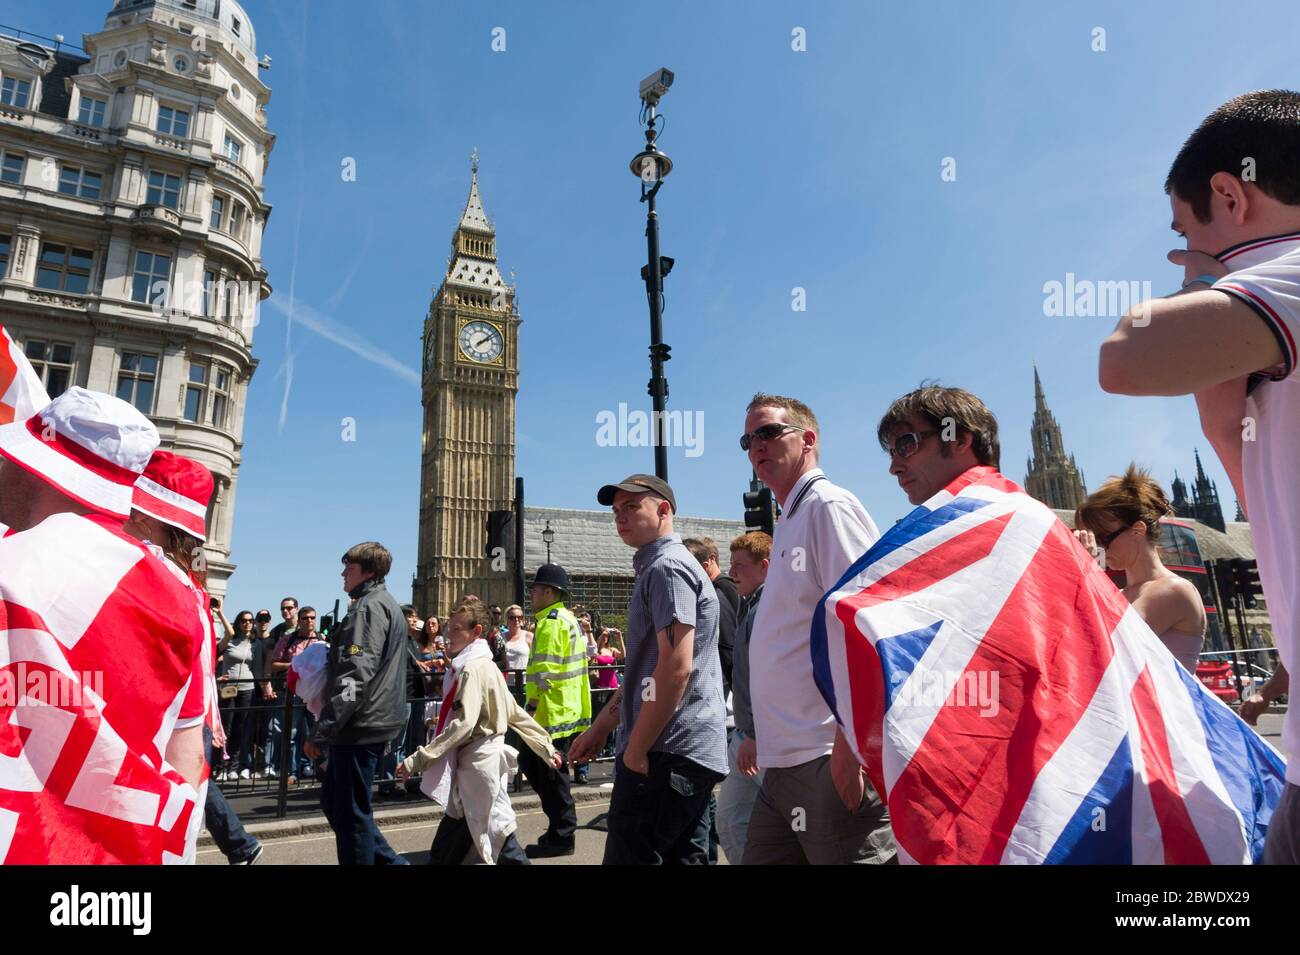 English Defence League (EDL) members on  a March organised by group calling itself 'British Citizens Against Muslim Extremists'. The protest is about Stock Photo